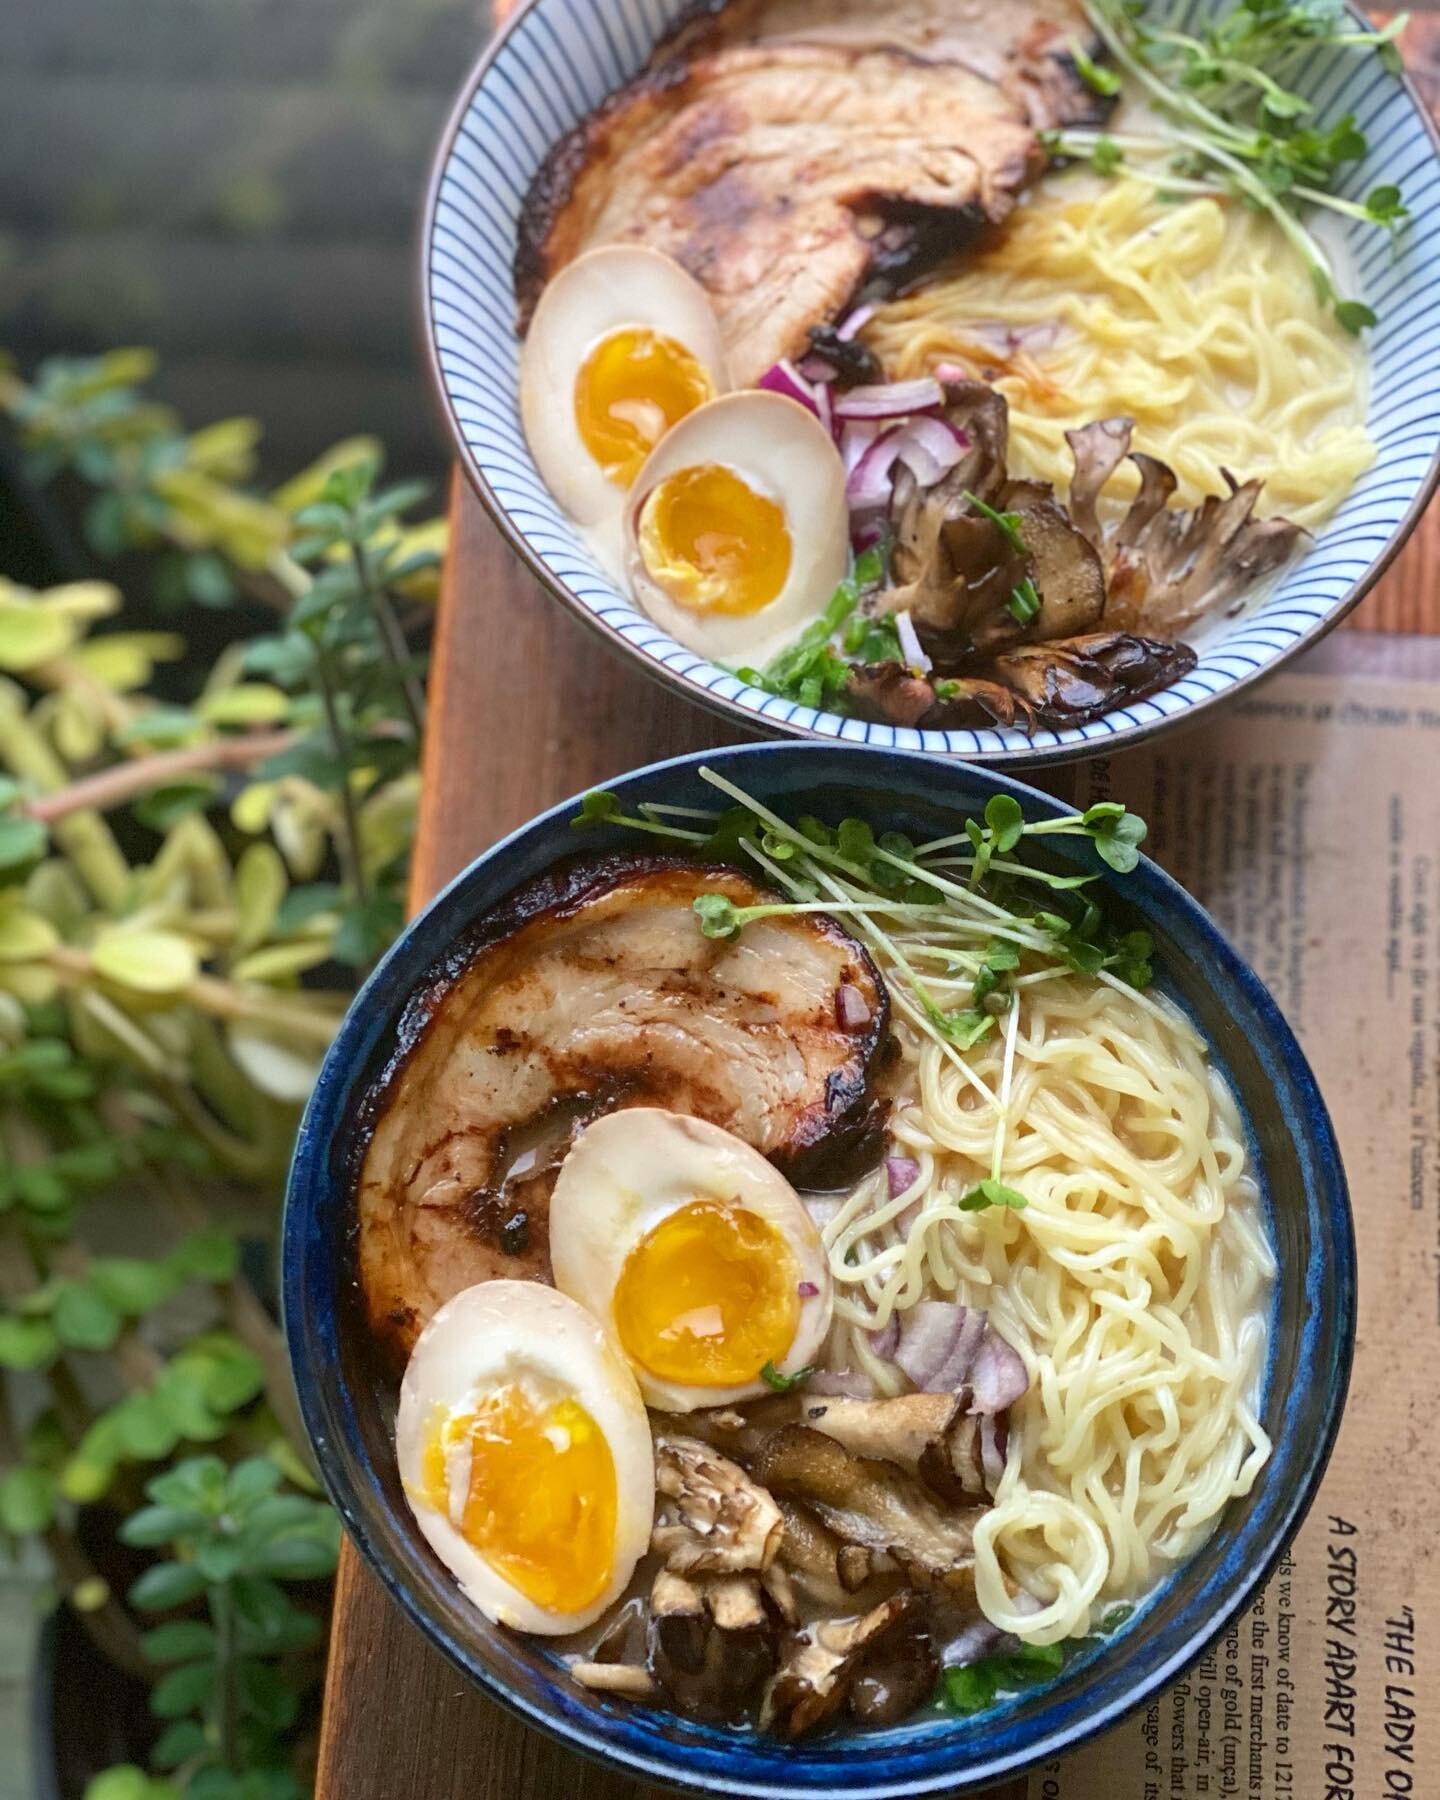 Sometimes you&rsquo;re just in the mood to torch some pork chashu for your Tonkotsu and you don&rsquo;t need a reason 🤘🏼🍜⚡️

Luckily, we have a homemade chashu recipe on our blog for when that day hits 🌟